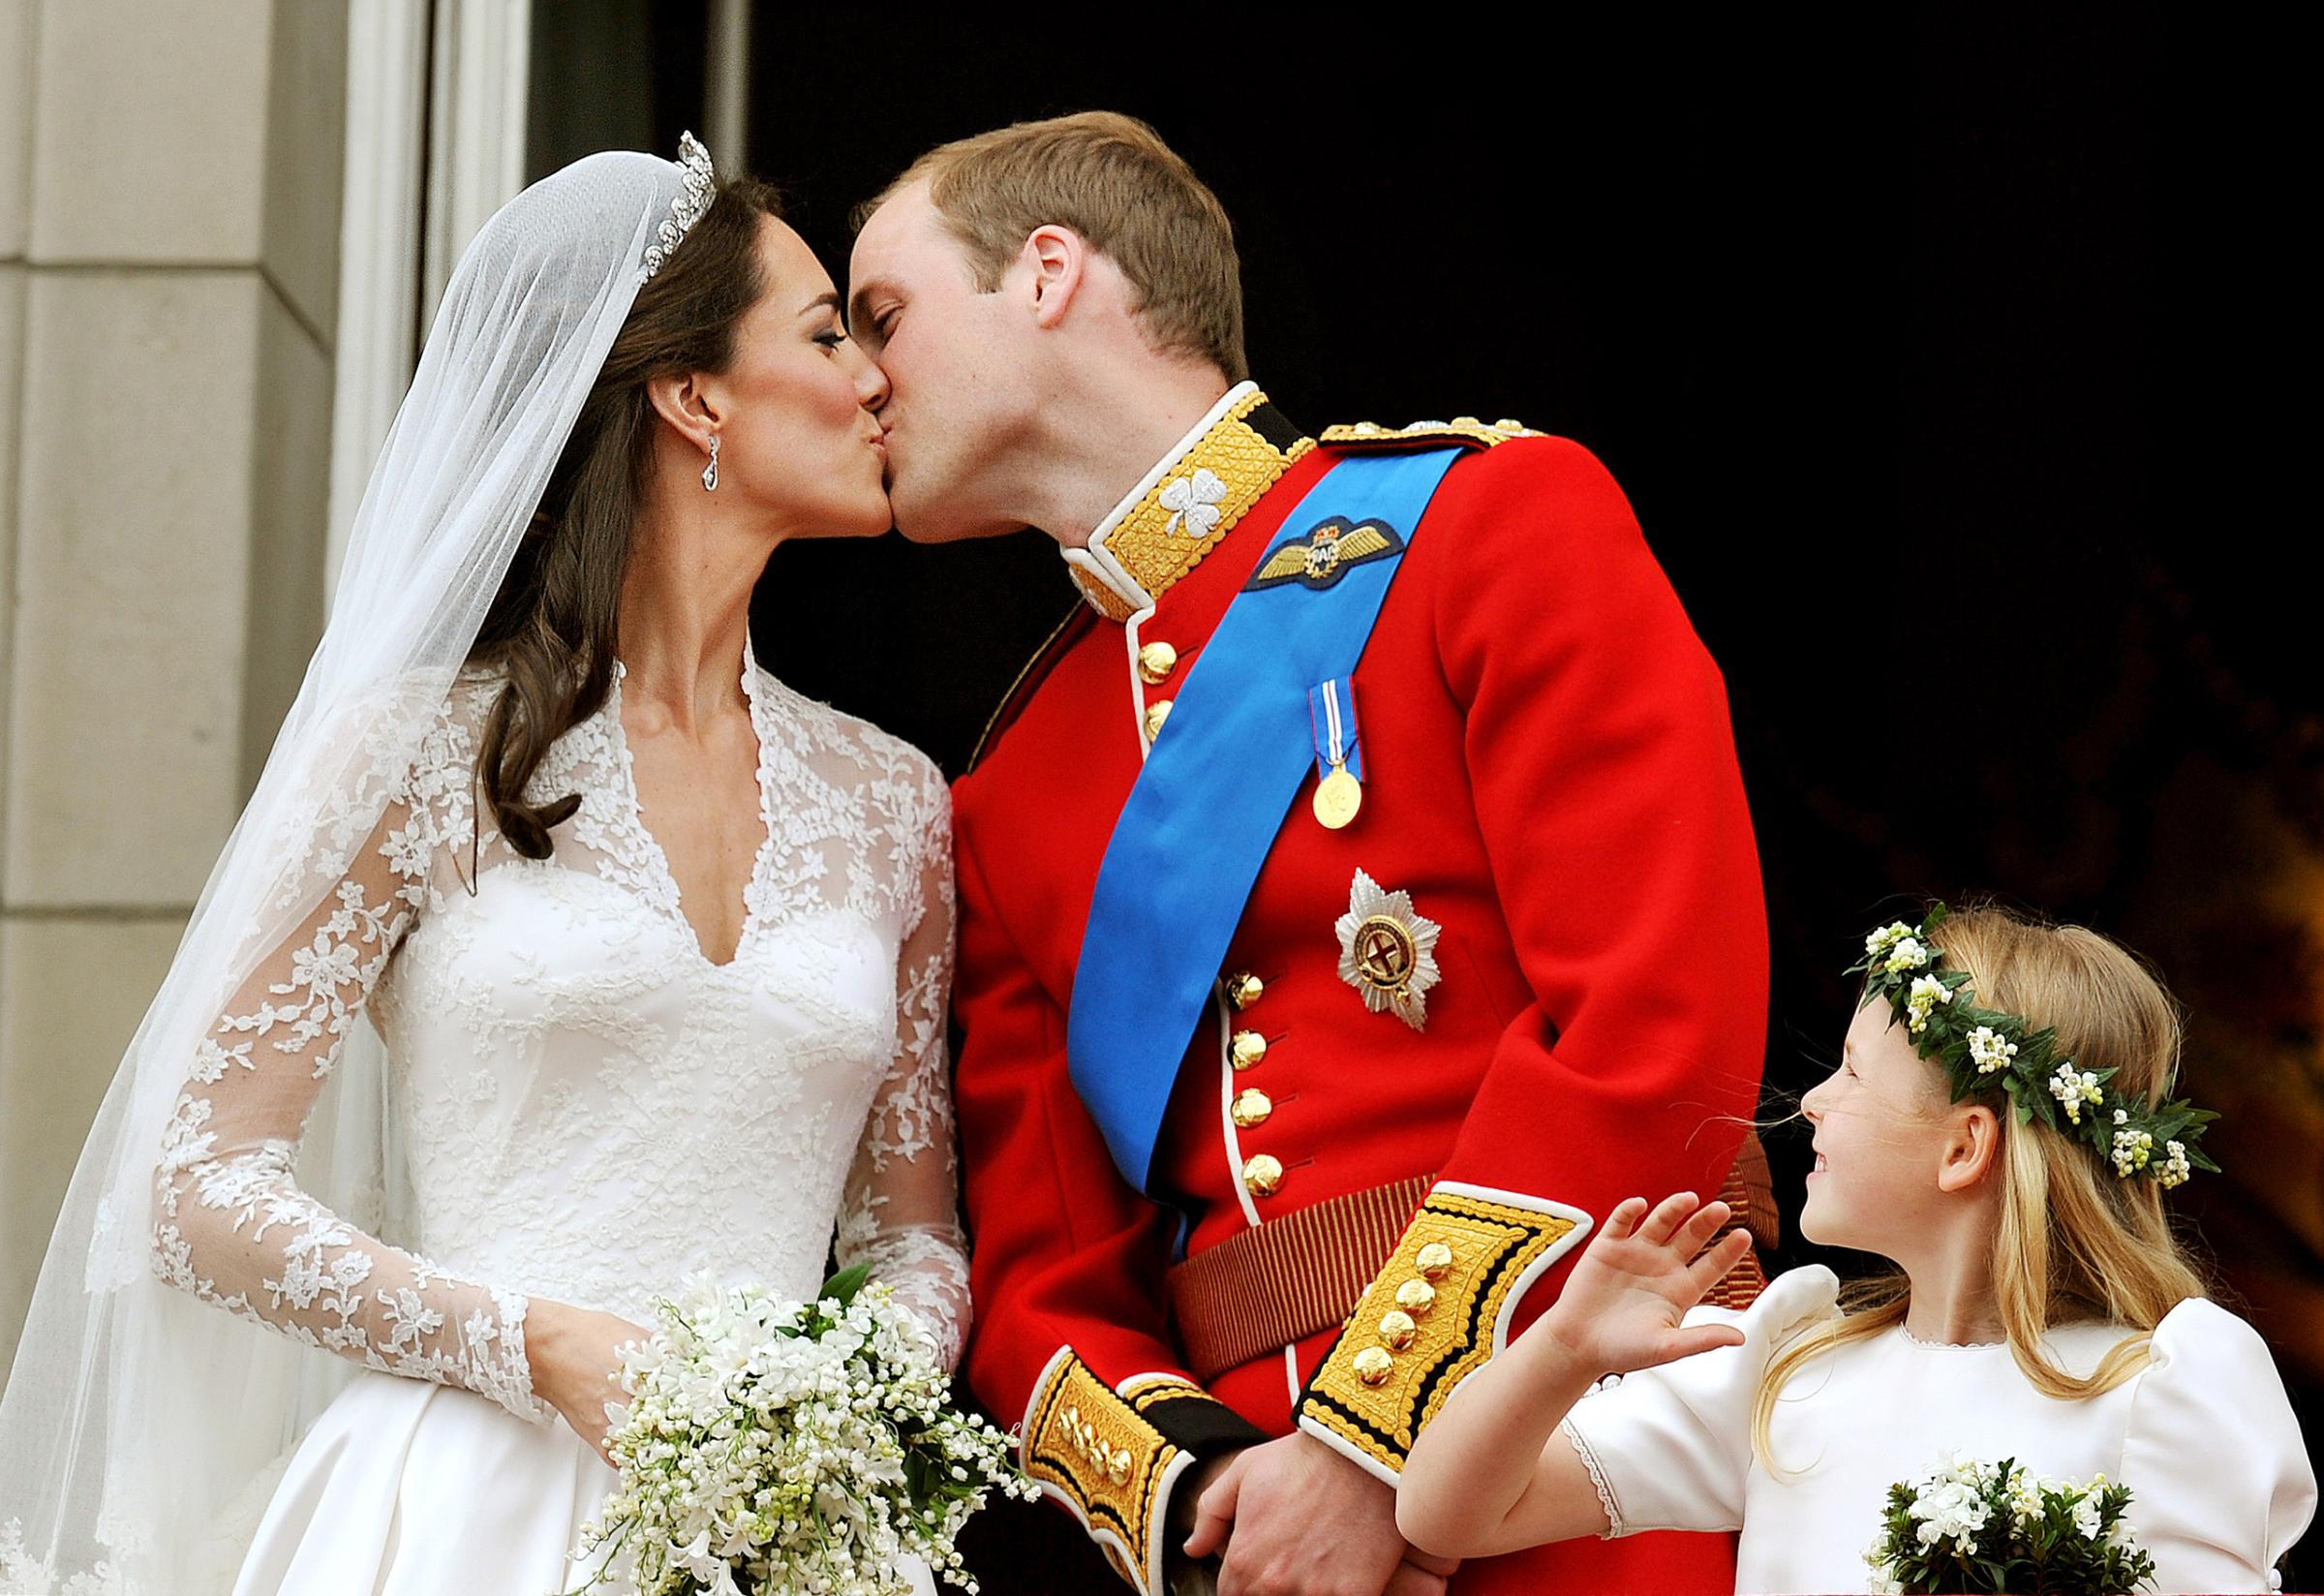 Prince William and Catherine kiss on the balcony of Buckingham Palace after getting married in London on April 29, 2011.